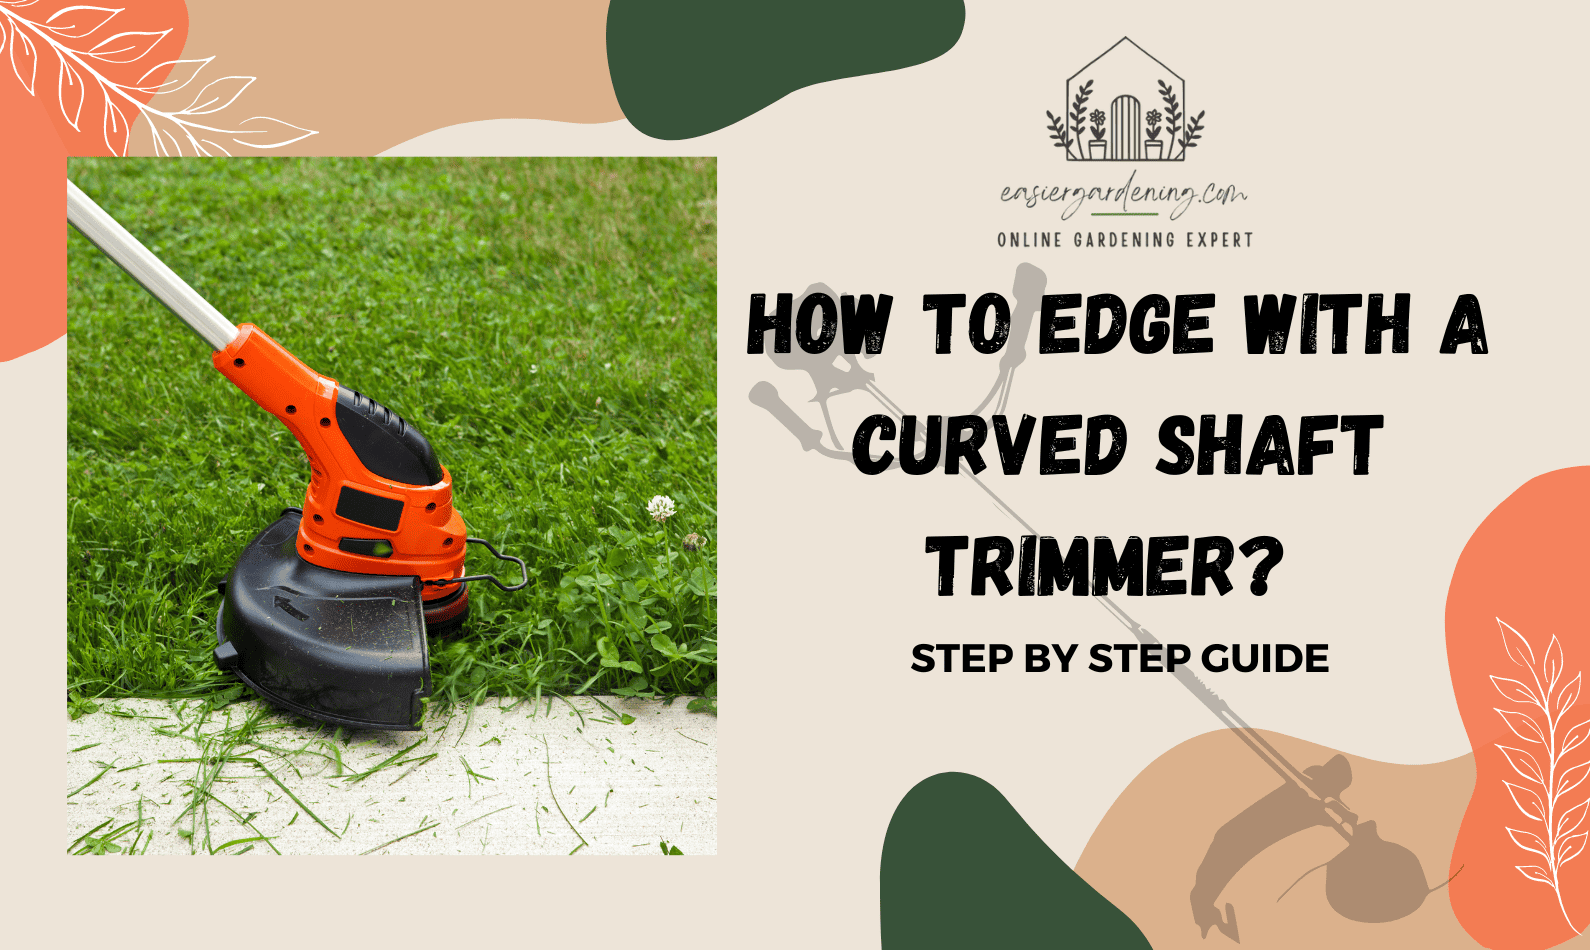 How to Edge with a Curved Shaft Trimmer?